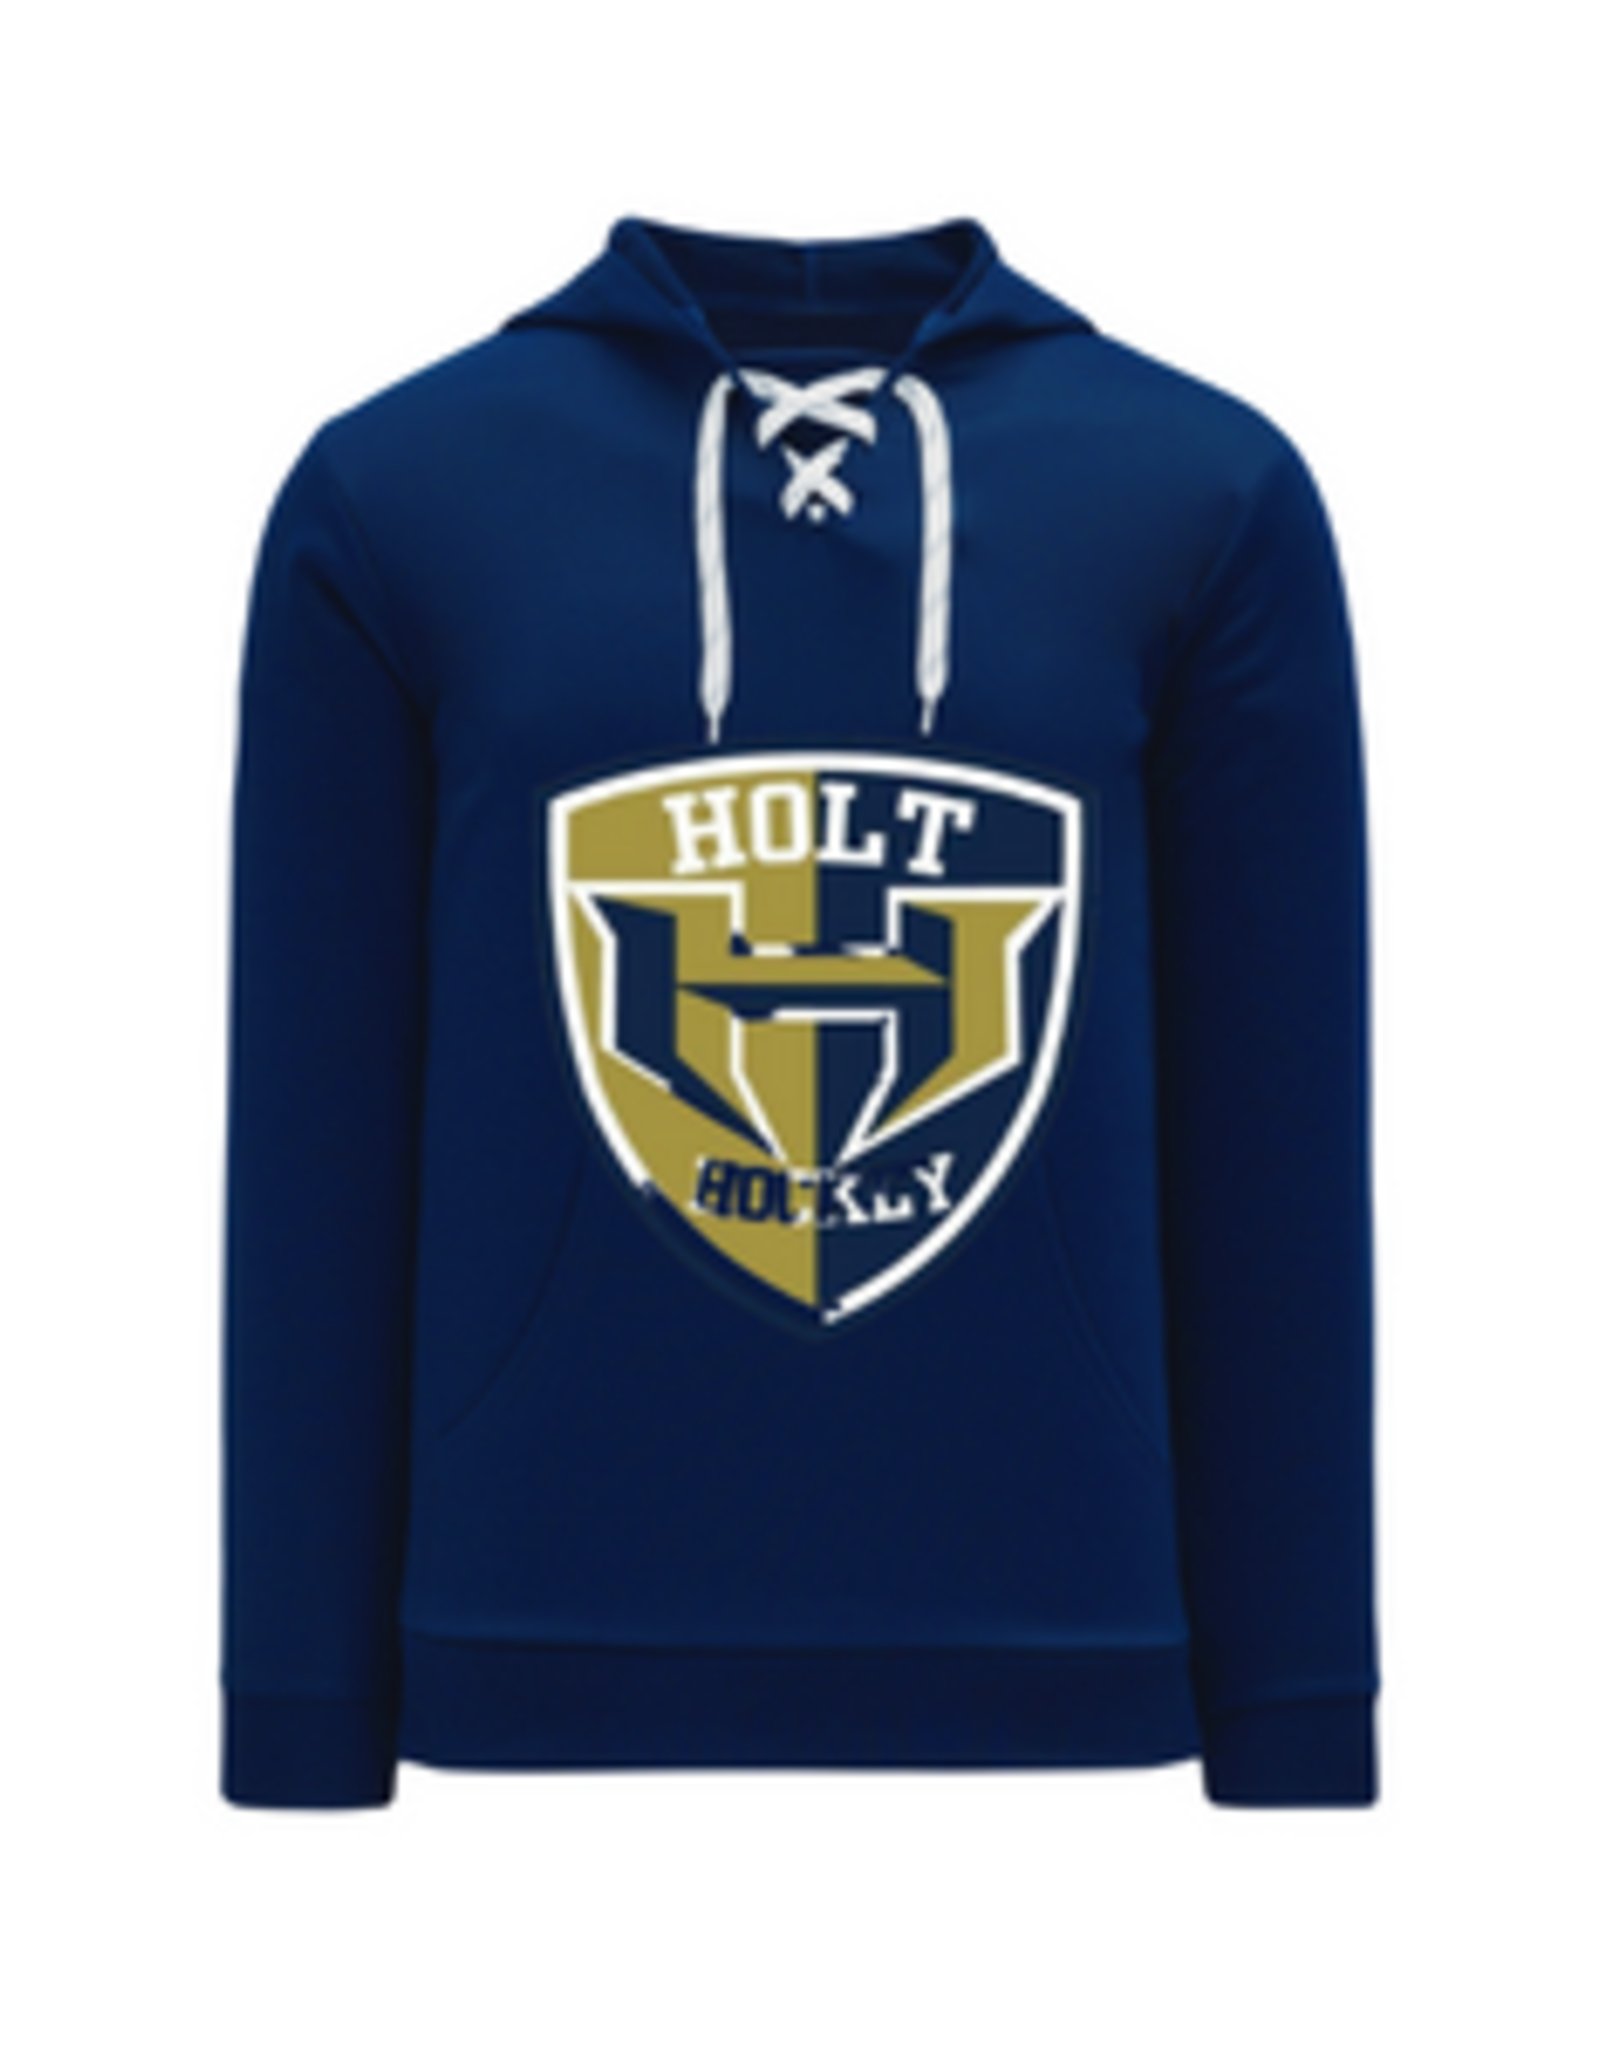 AK Holt AK All Navy Lace Up Hoodie (YOUTH)